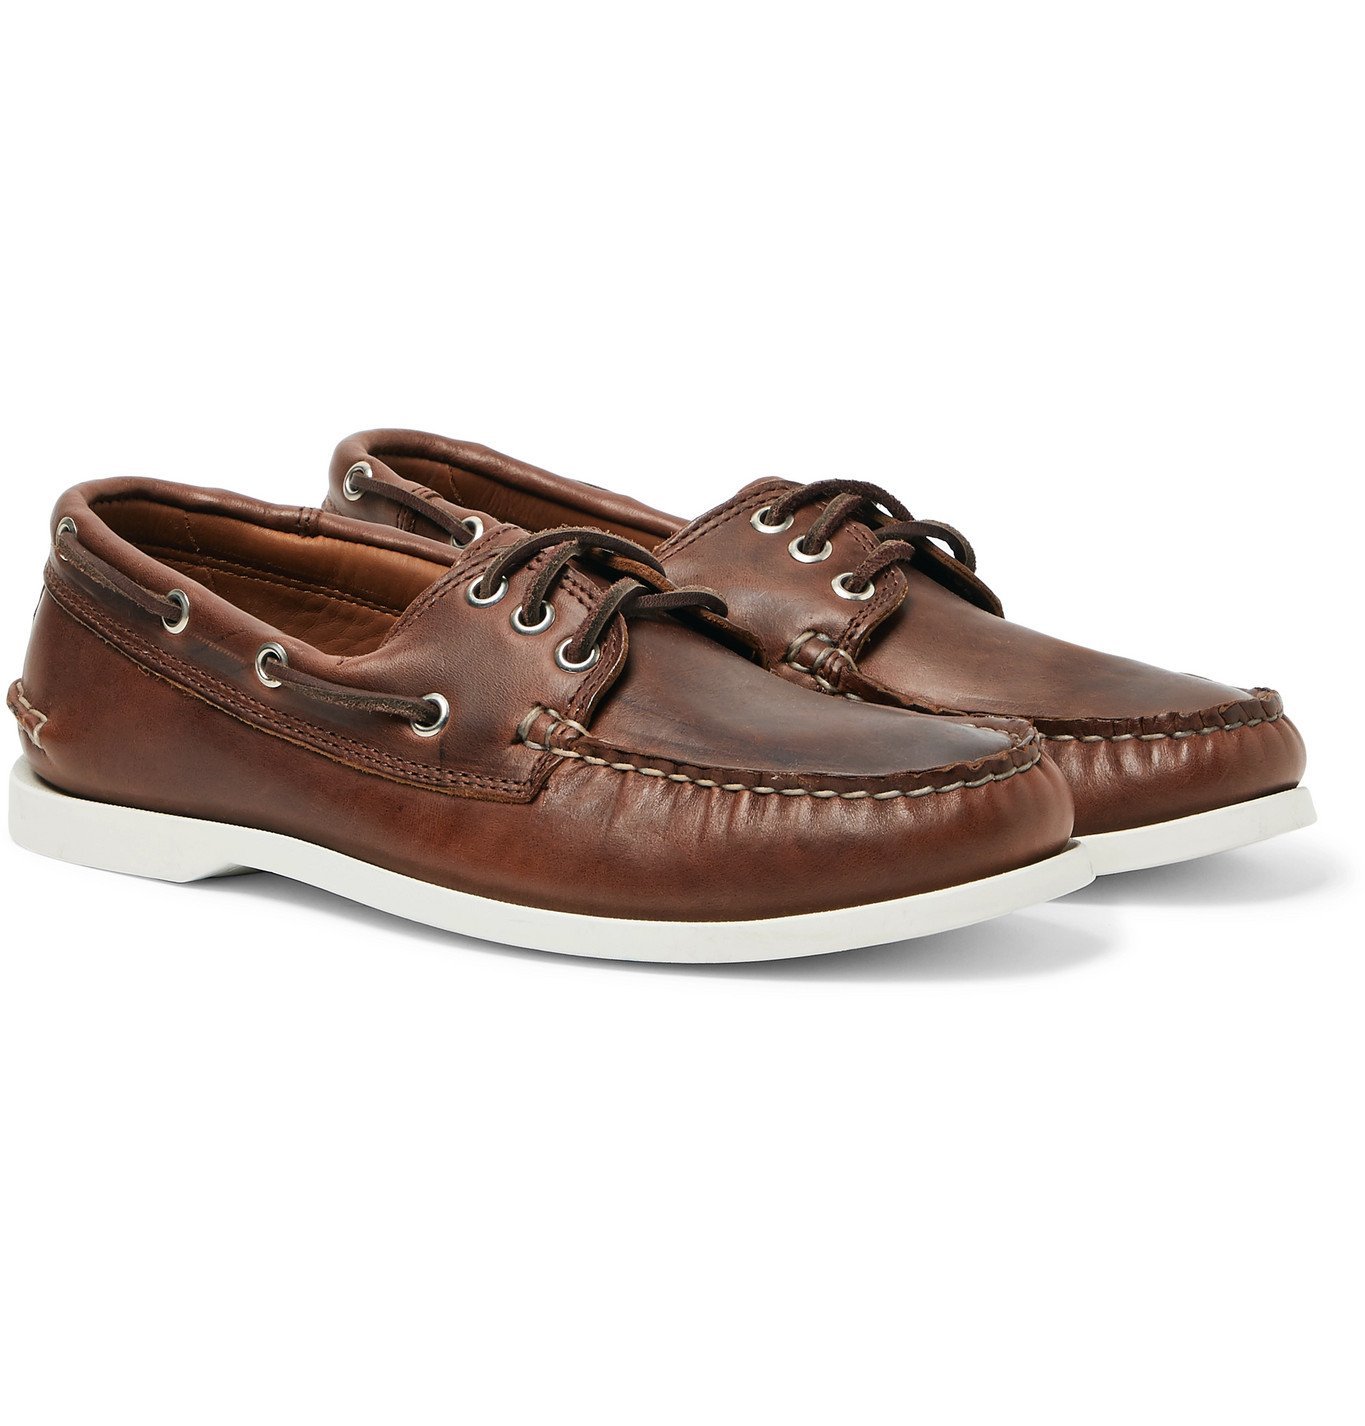 Quoddy - Downeast Leather Boat Shoes - Brown Quoddy